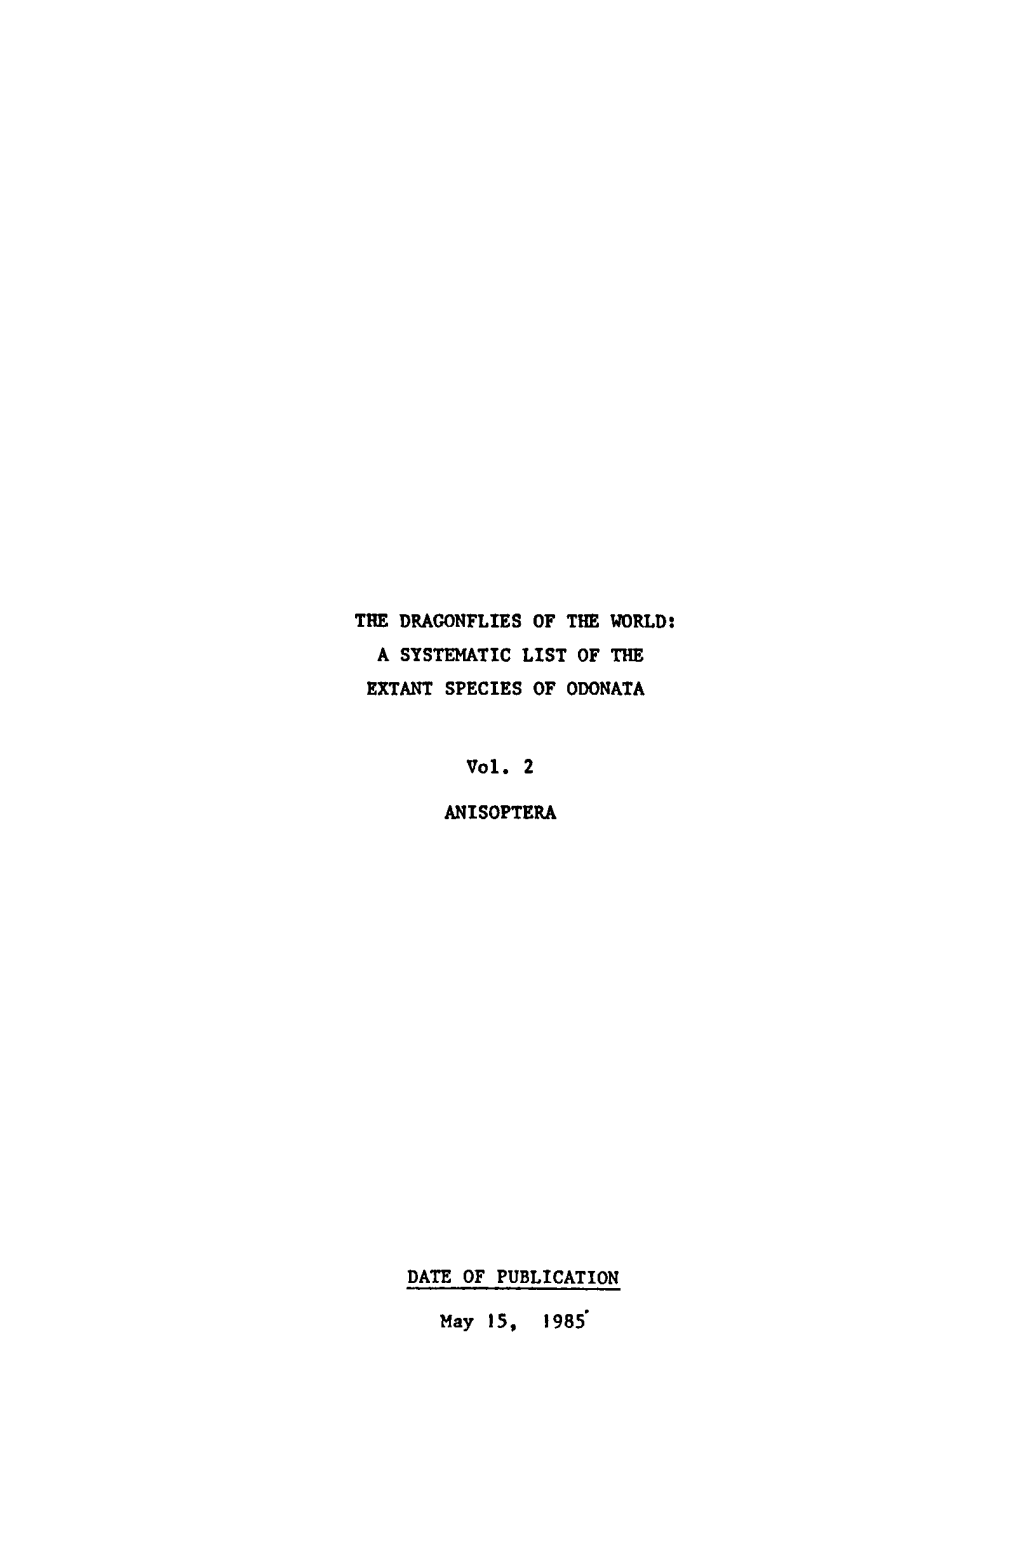 A Systematic List of the Extant Species of Odonata. Vol. 2 Anisoptera DATE